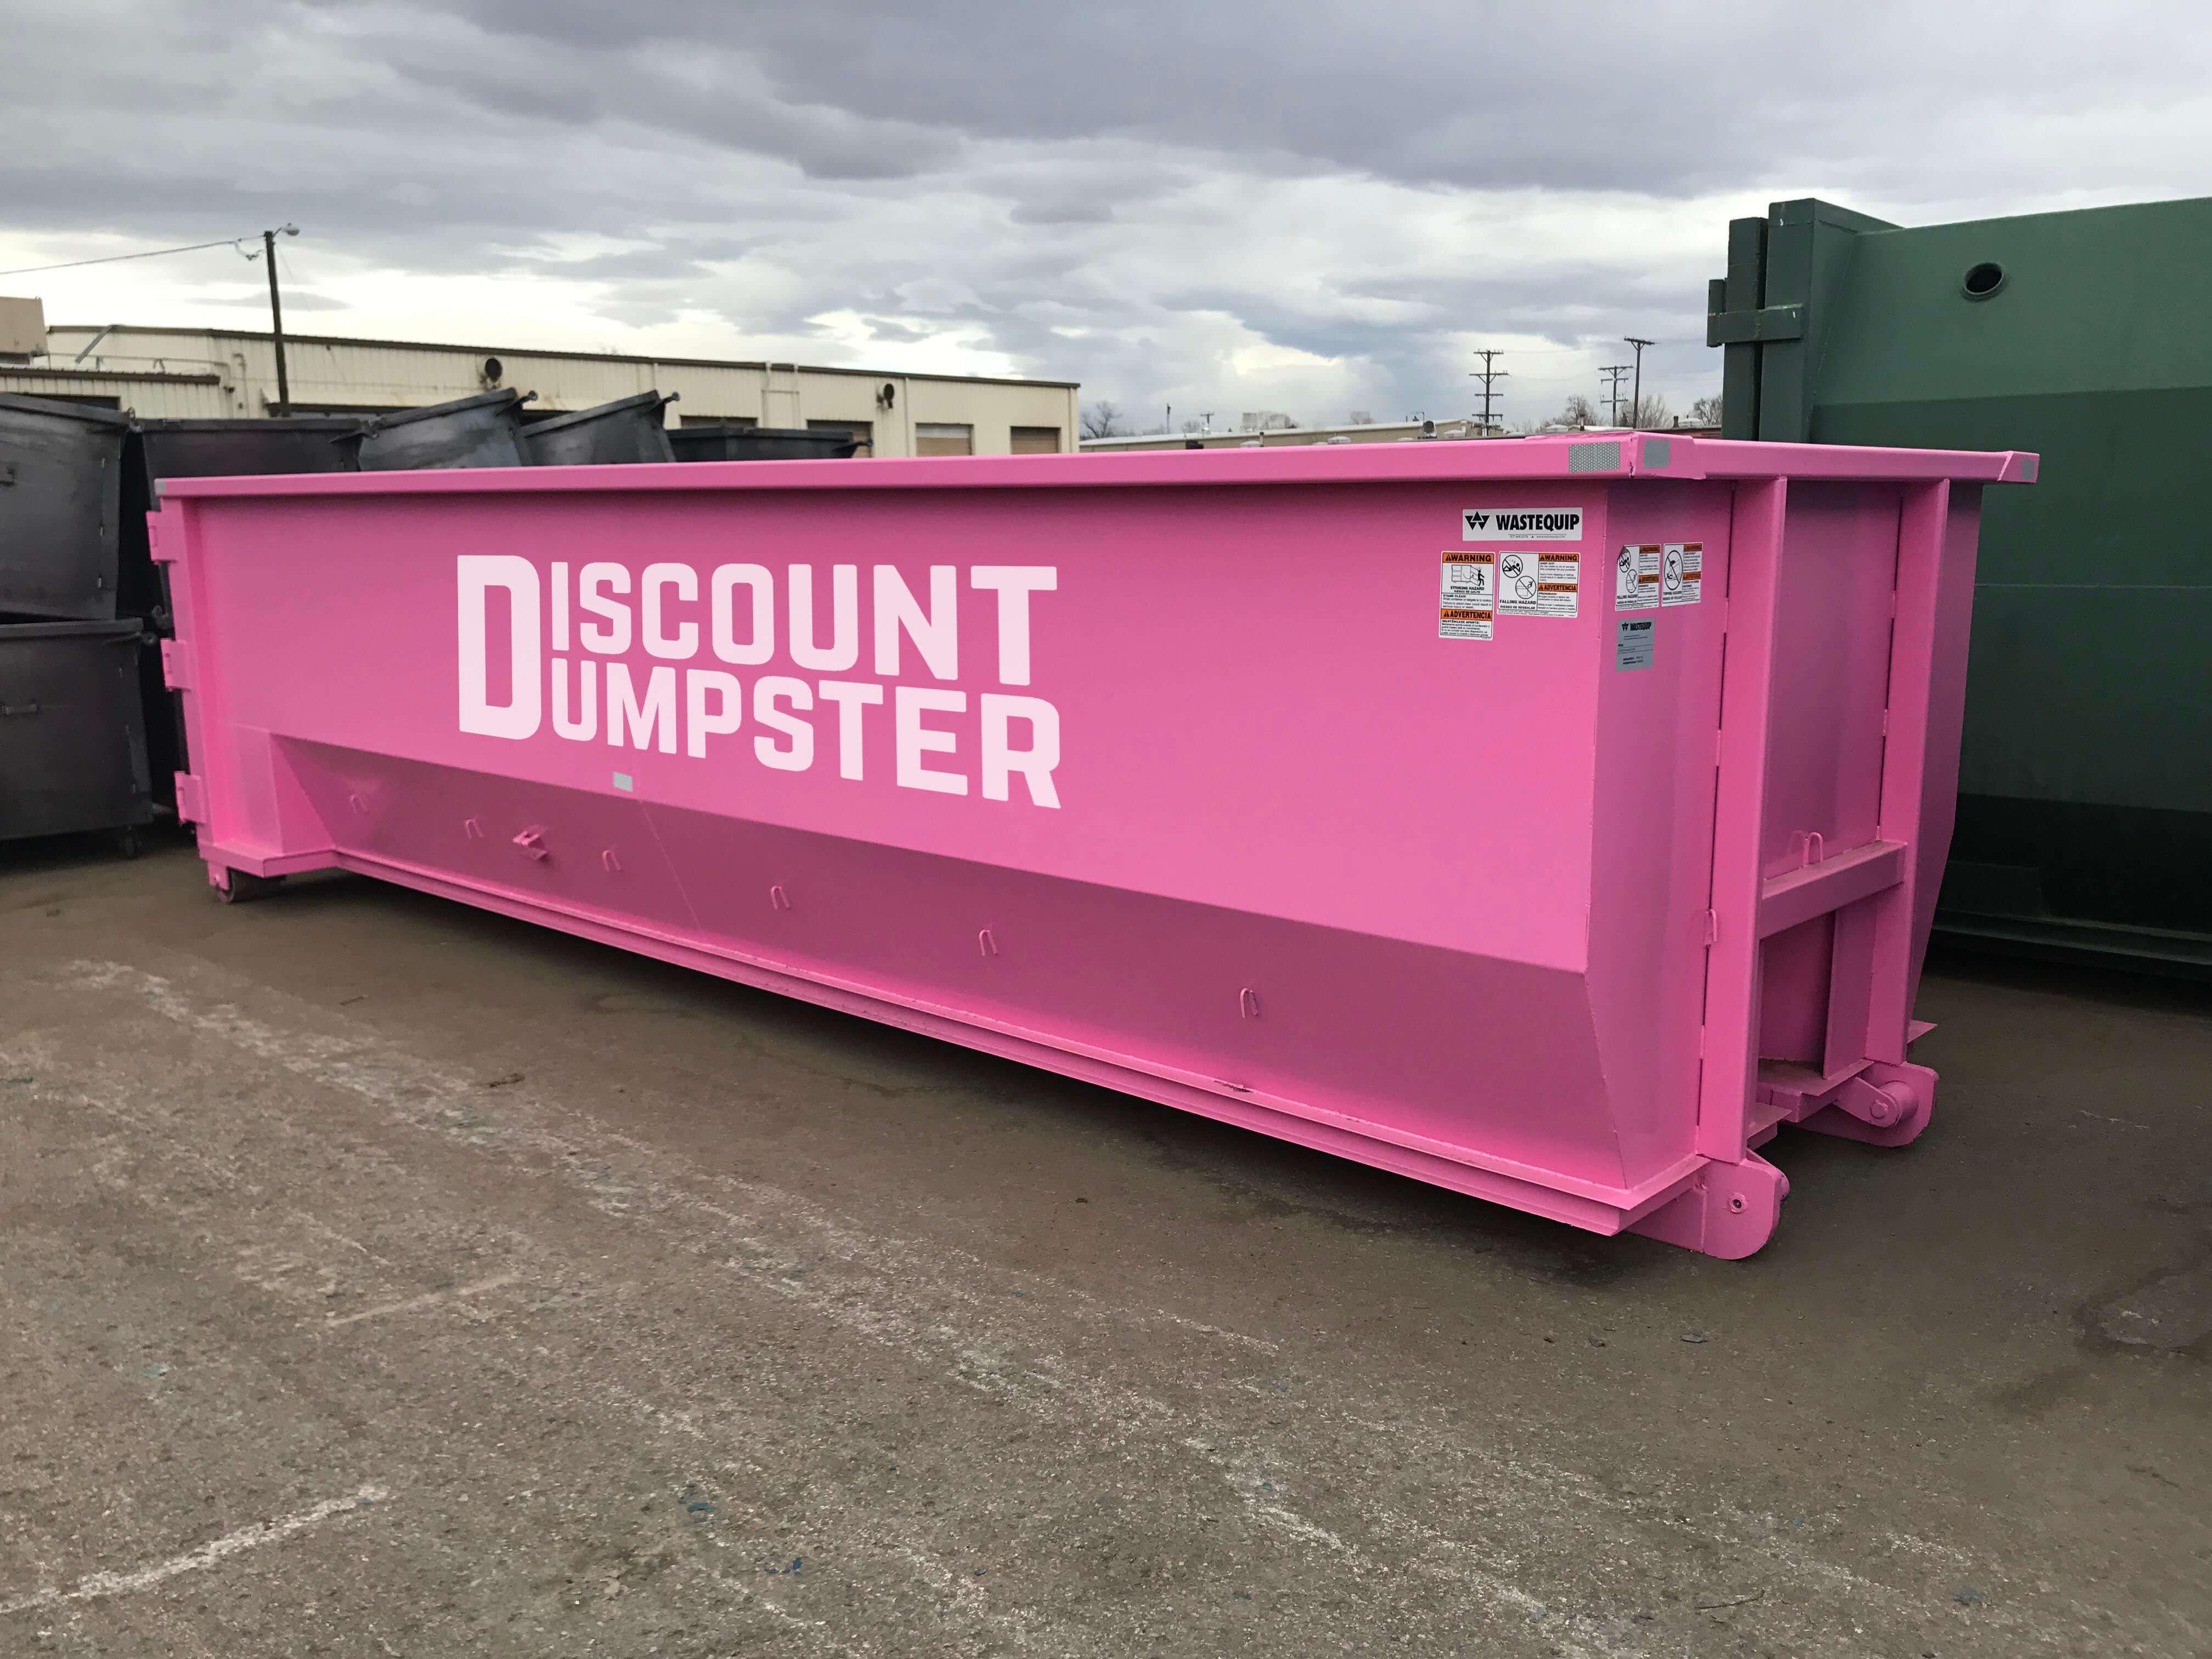 Discount dumpster has quality dumpsters and waste removal services in Chicago il